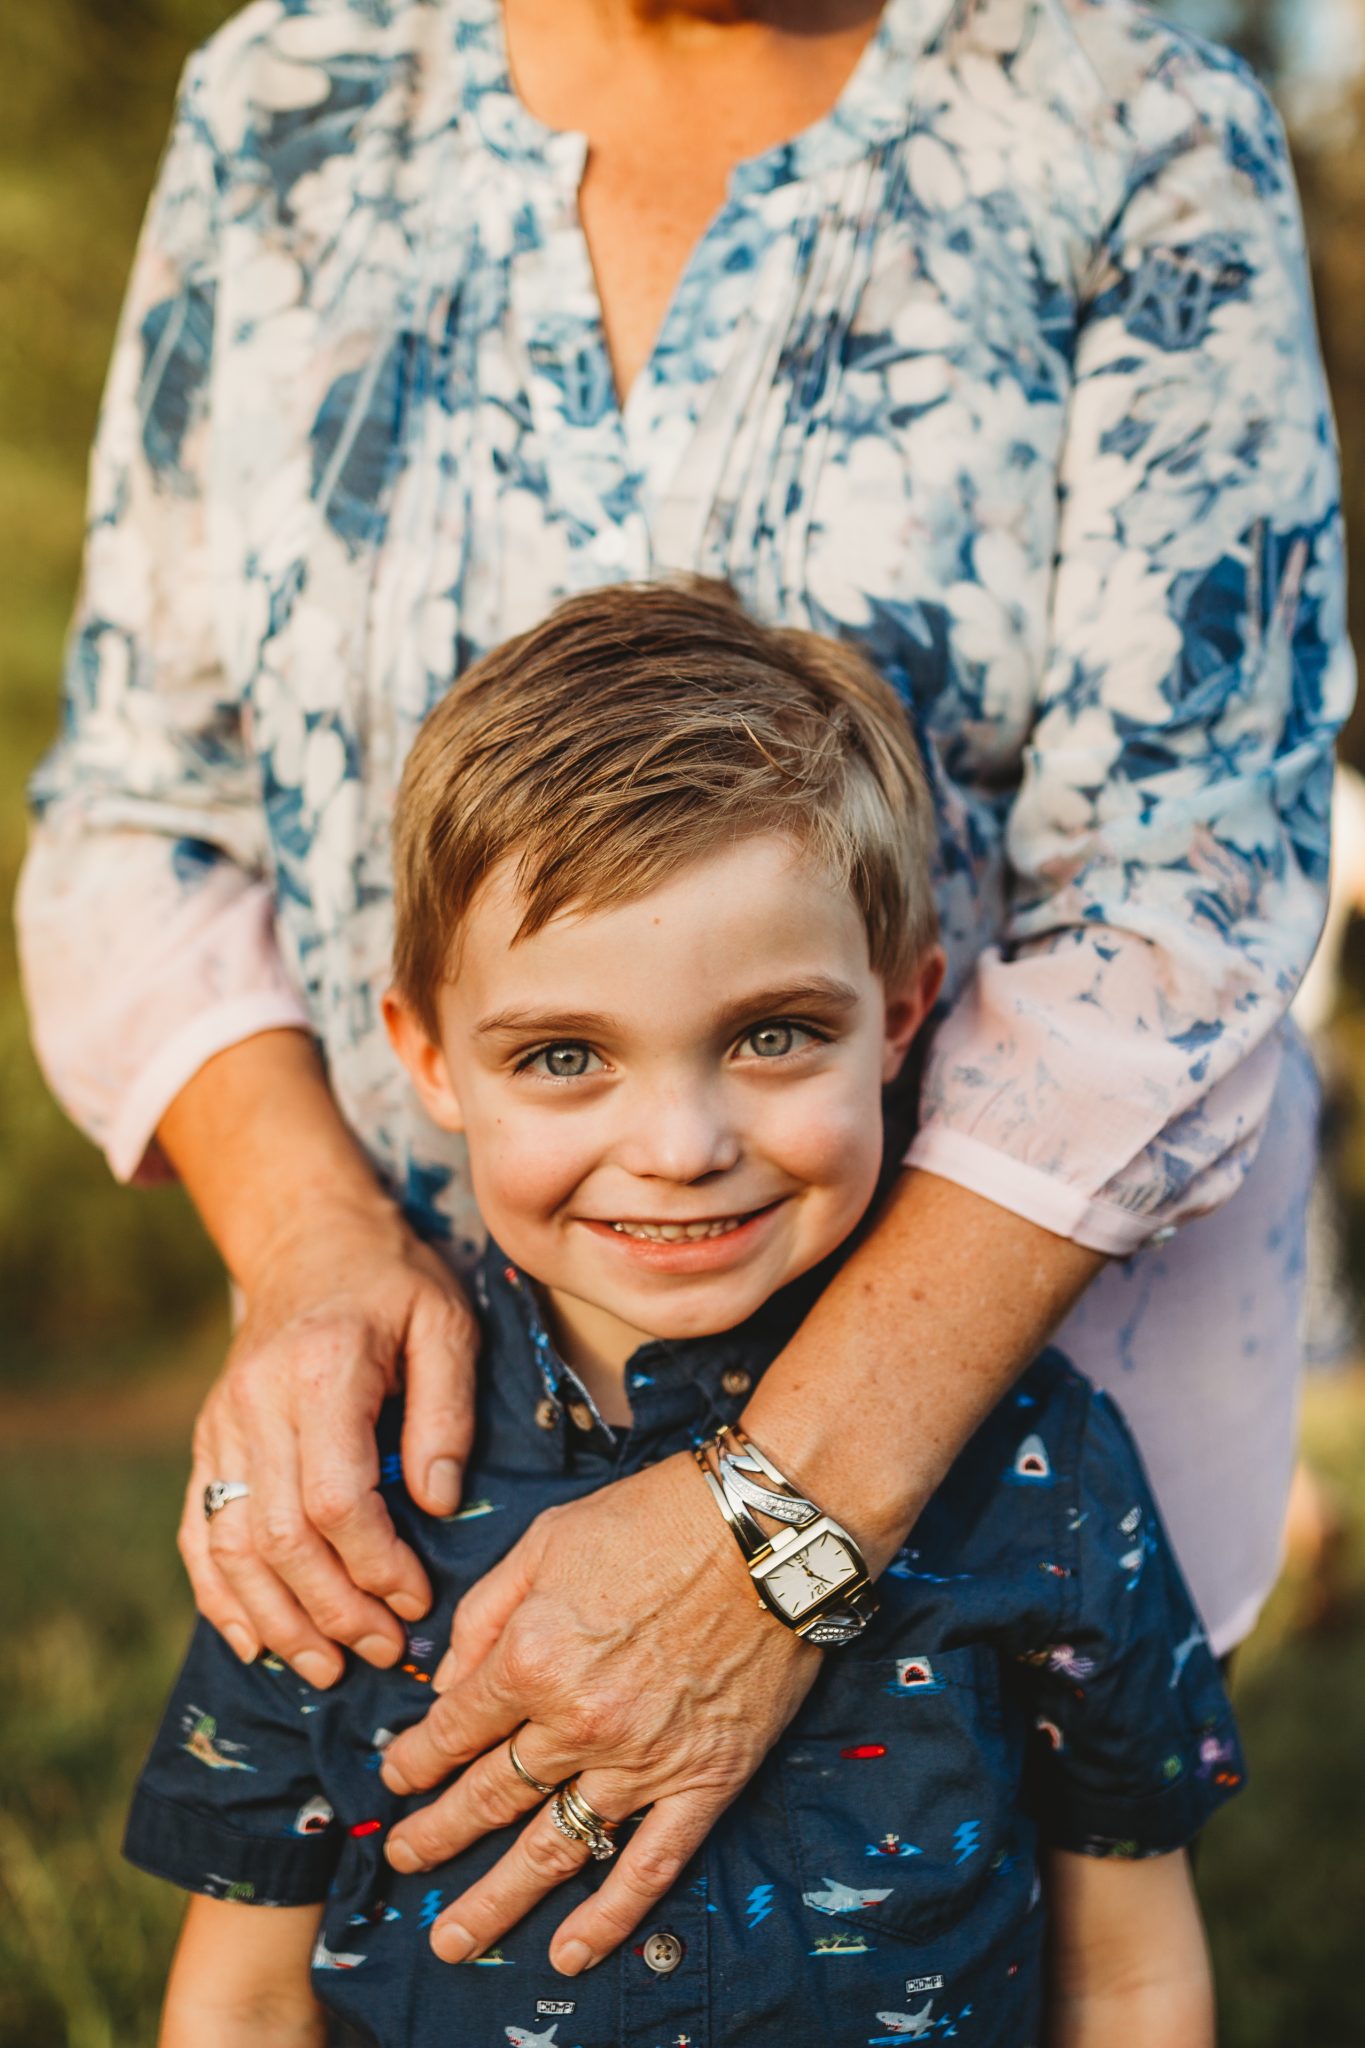 Close up portrait of young boy standing with grandmother's arms around him